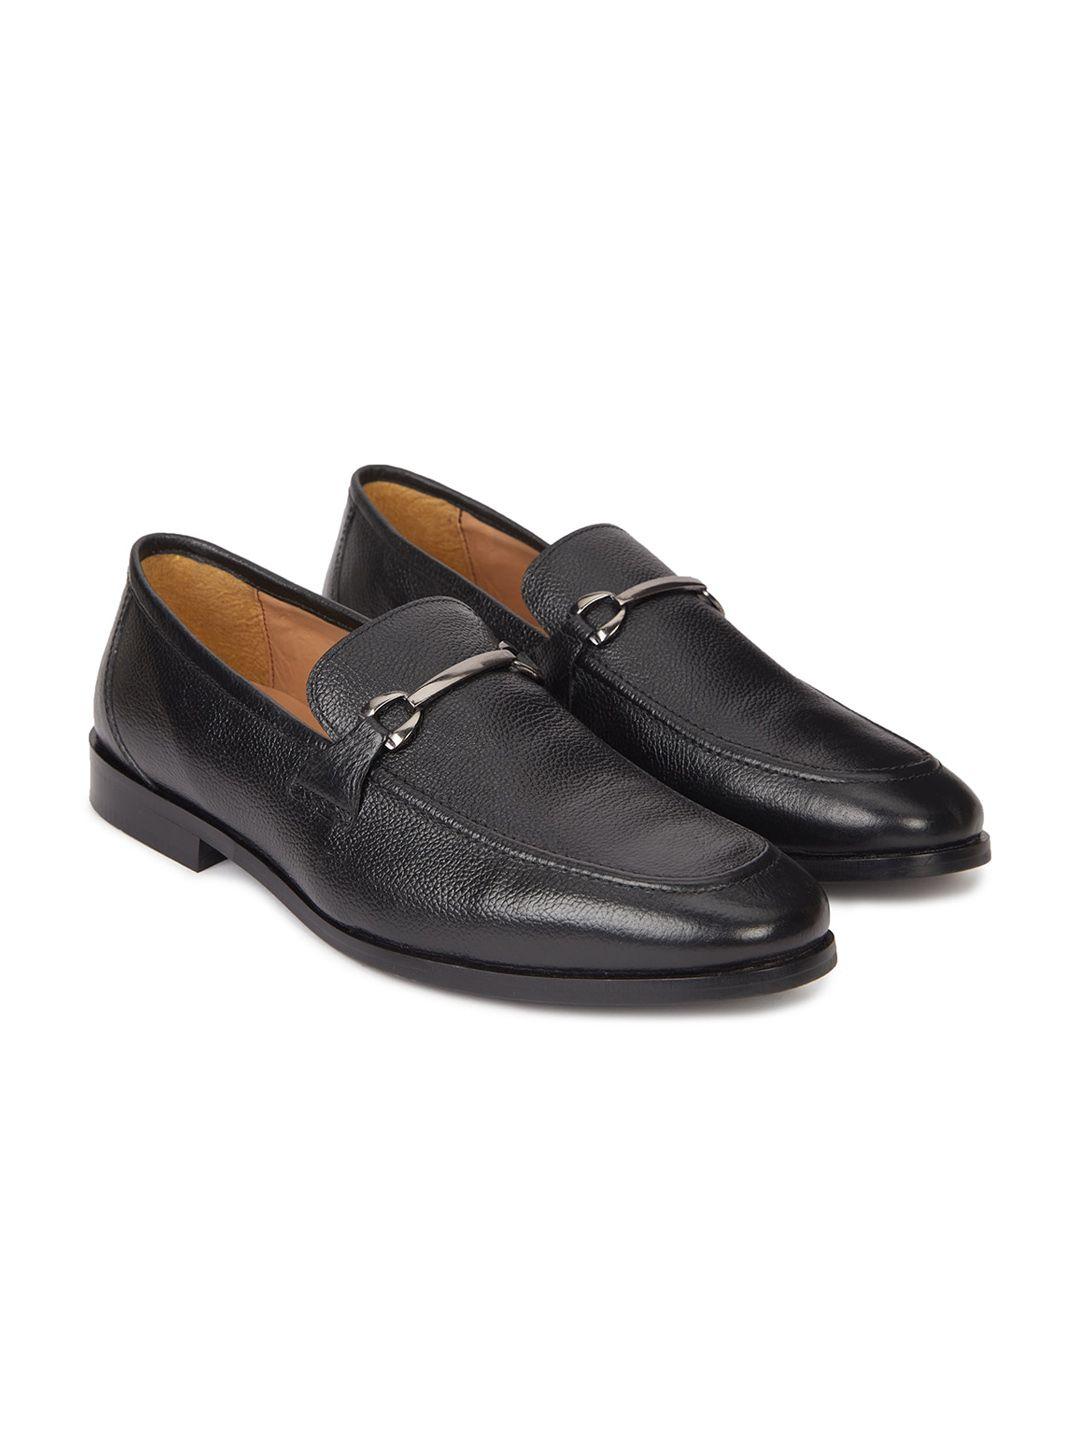 hats off accessories textured leather loafers